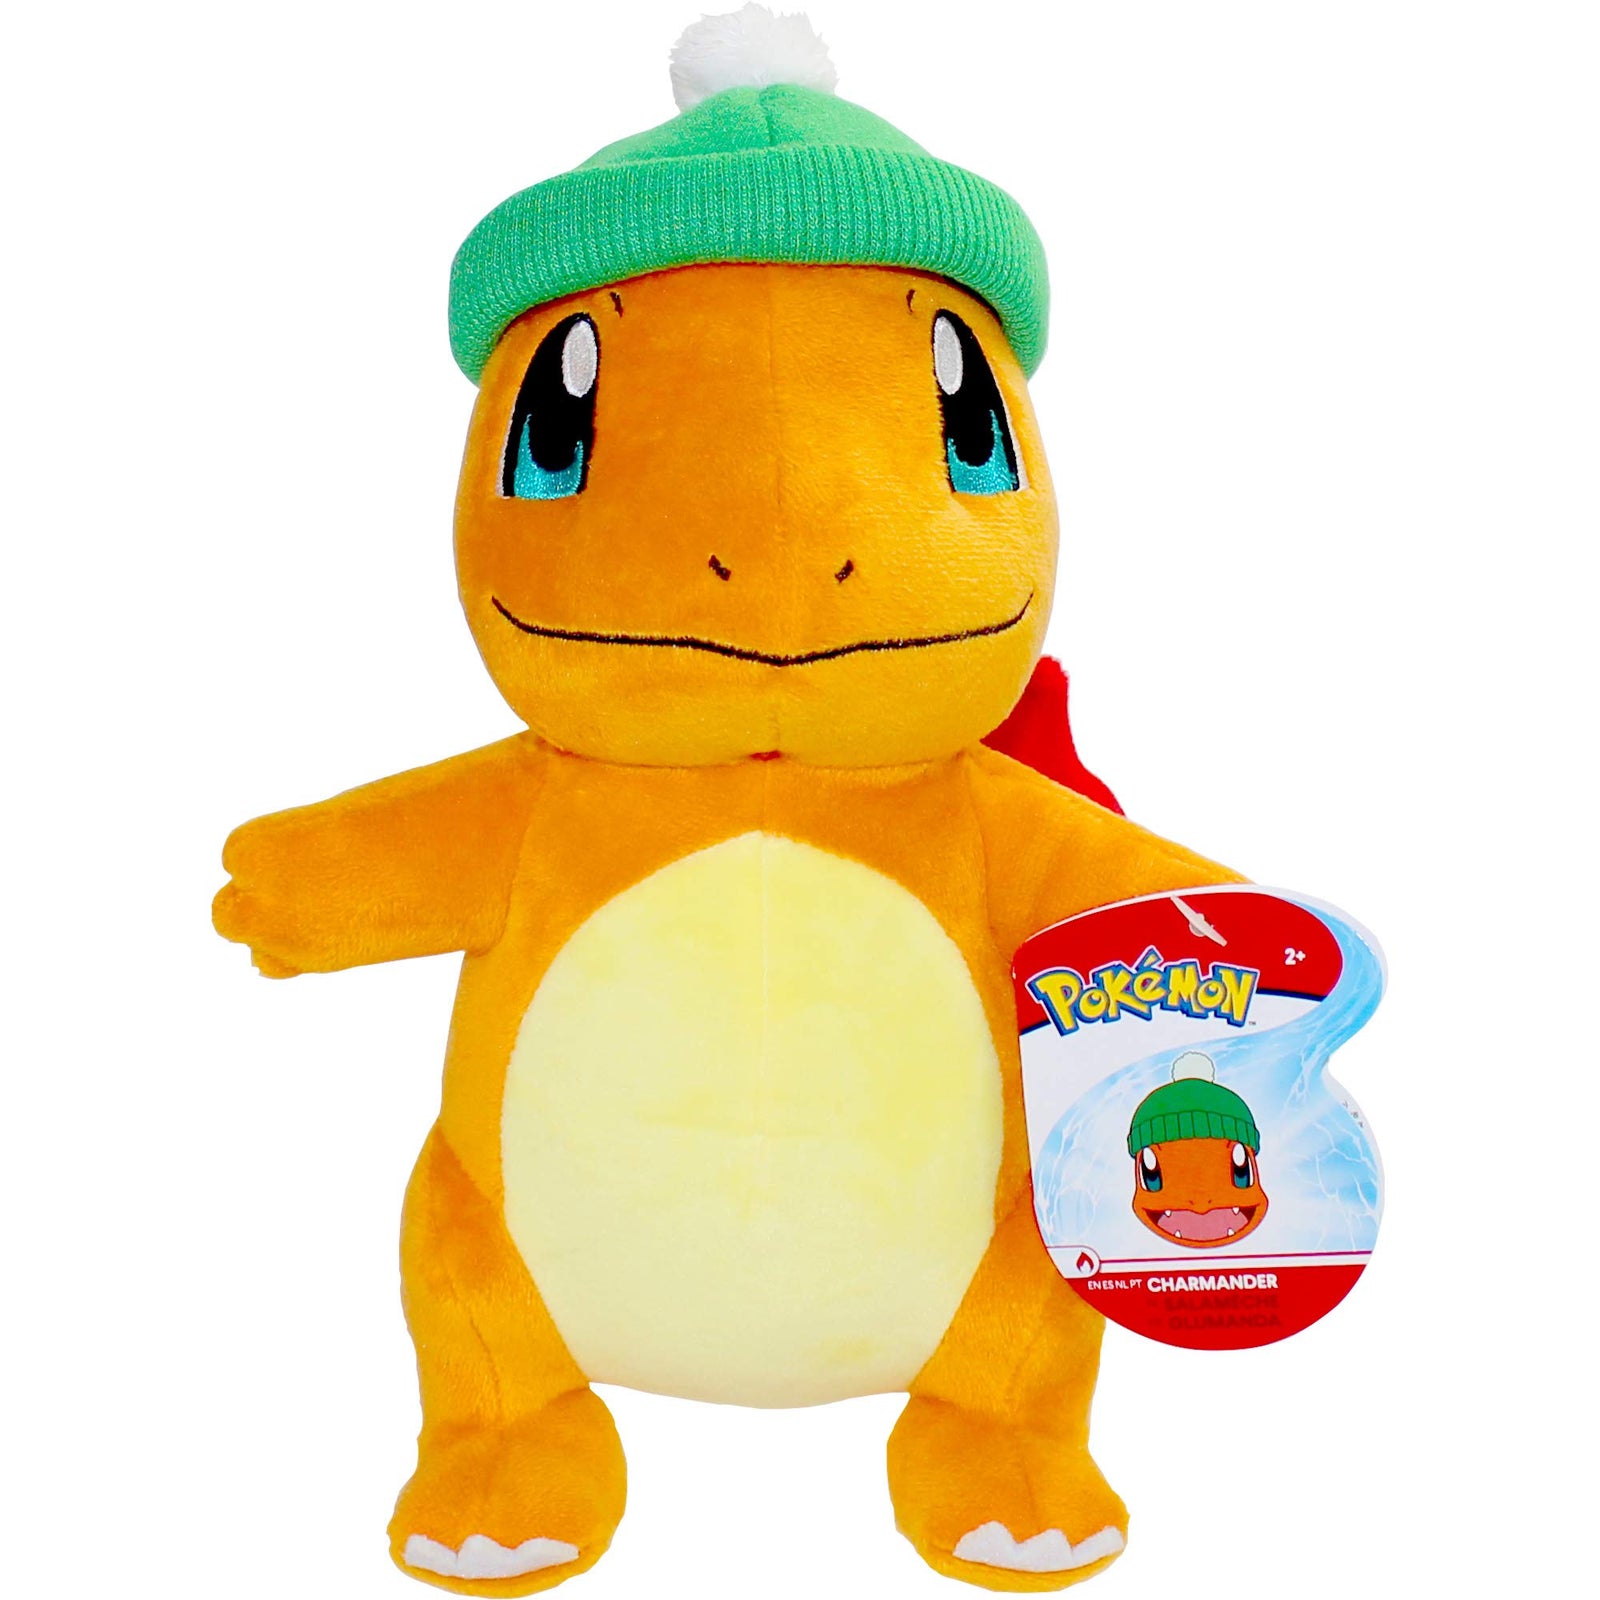 Pokemon Pikachu Holiday Seasonal Plush, 8-Inch Plush Toy, Includes Santa Hat Accessory - Super Soft Plush, Authentic Details - Perfect for Playing, Displaying & Gifting - Gotta Catch ‘Em All